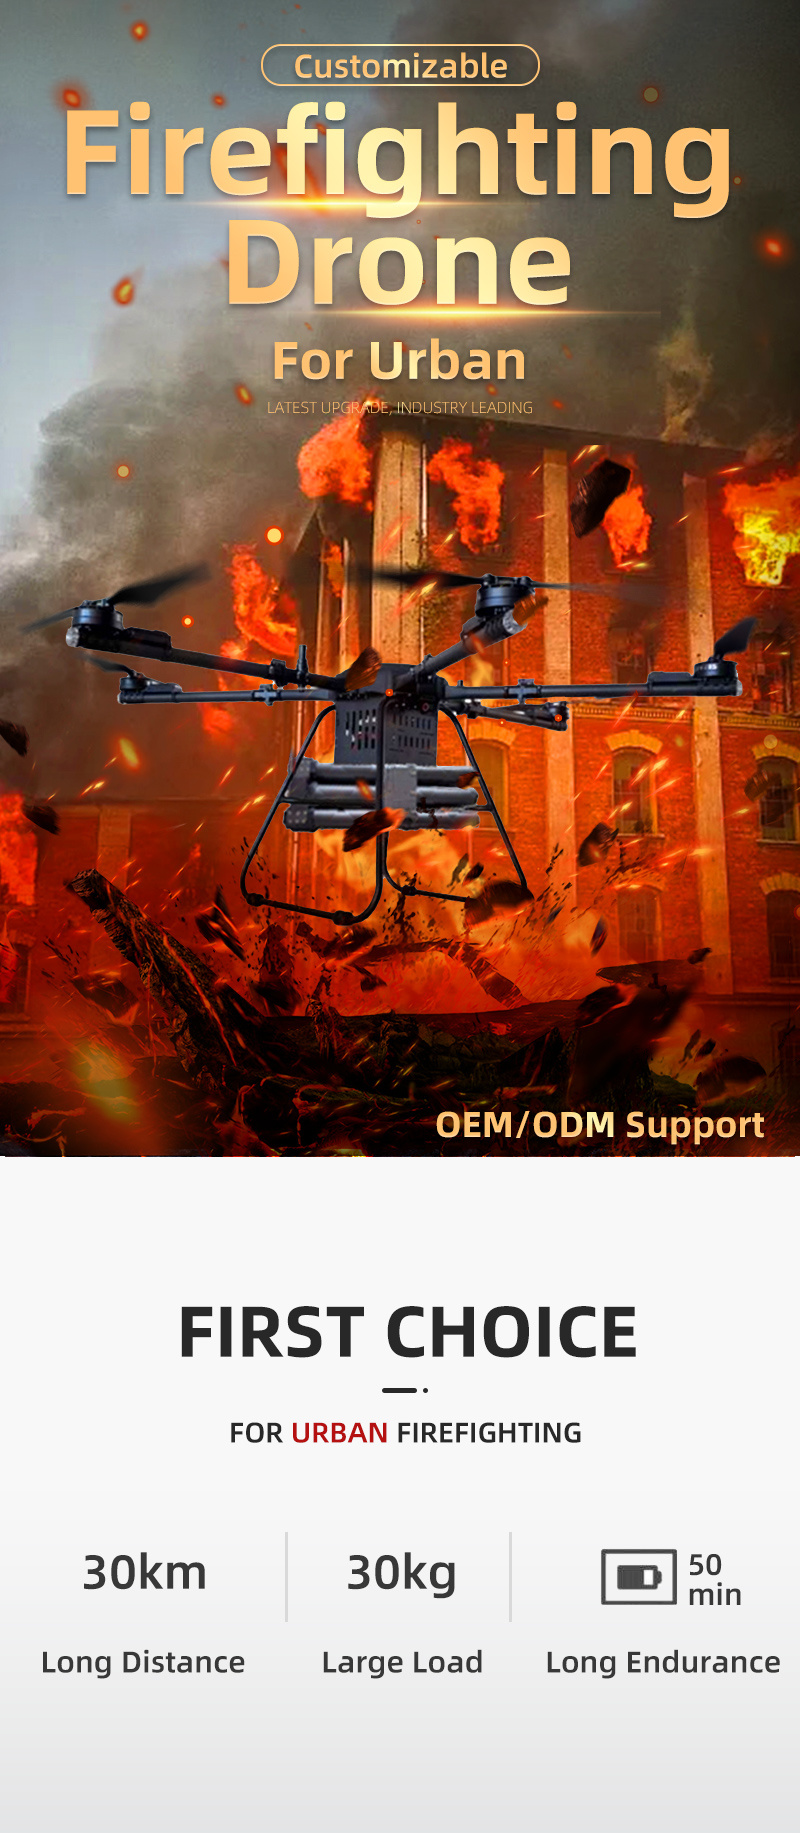 Urban Firefighting 9 Wind Resistance Level Heavy Lifting 30kg Payload Industrial Drone